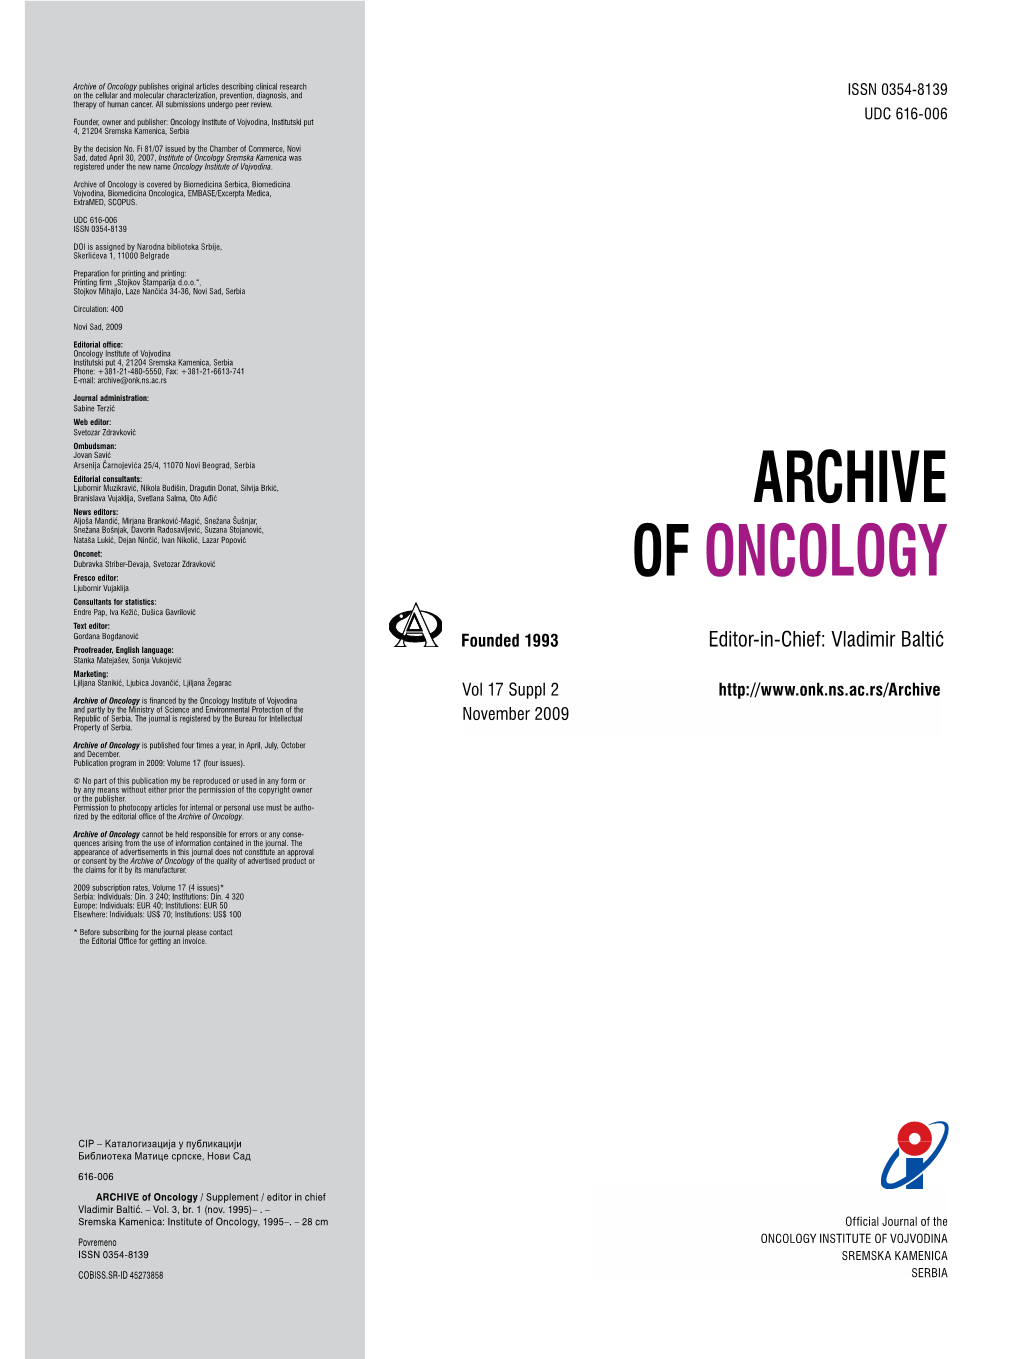 Archive of Oncology